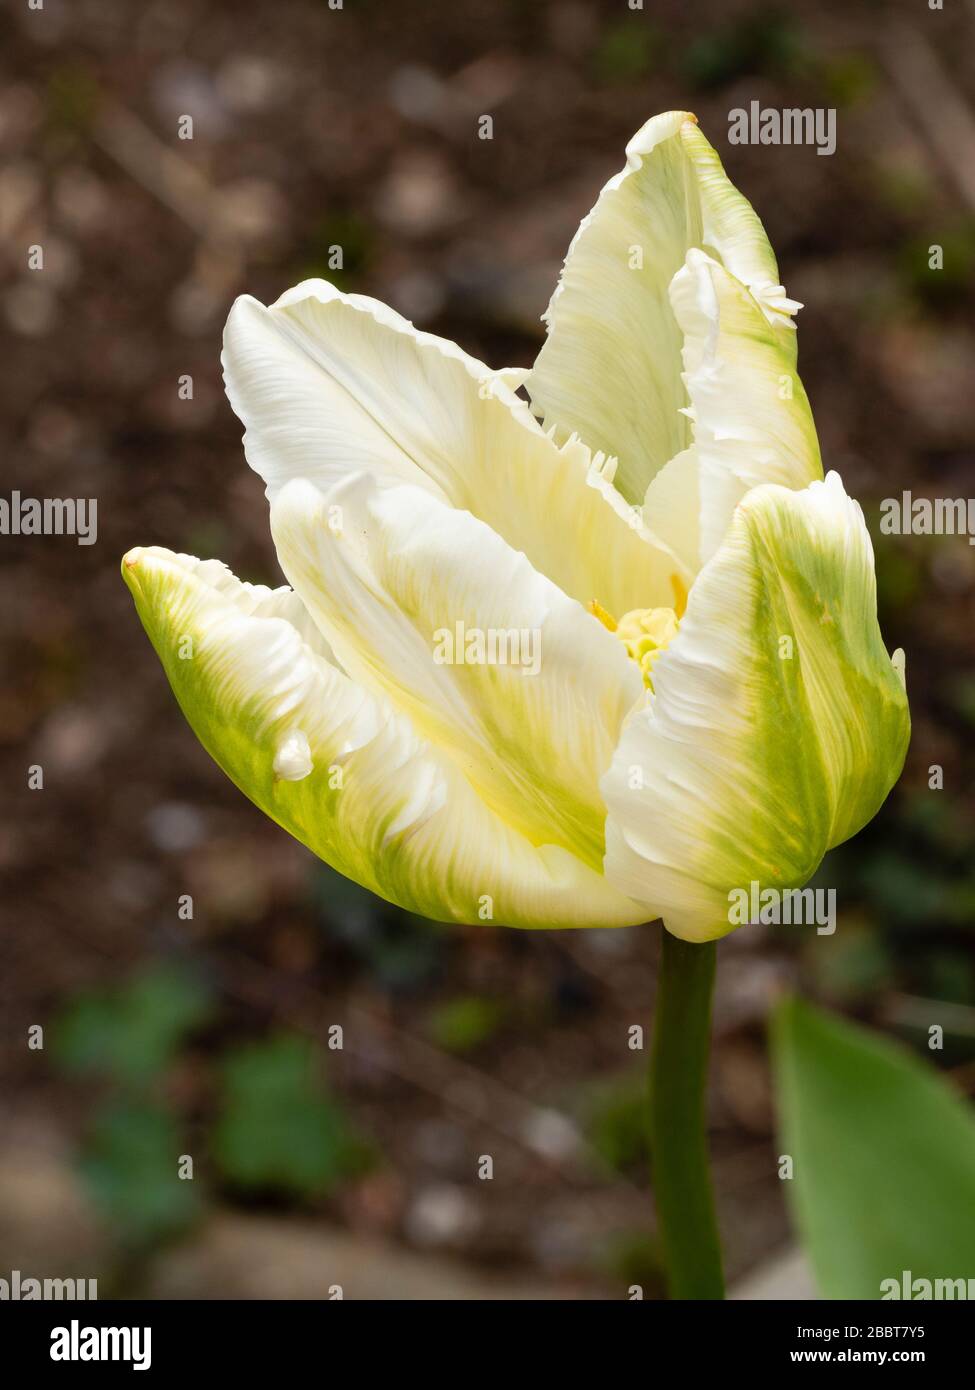 Green flashes on white petals of the mid spring flowering parrot tulip, Tulip 'White Parrot' Stock Photo